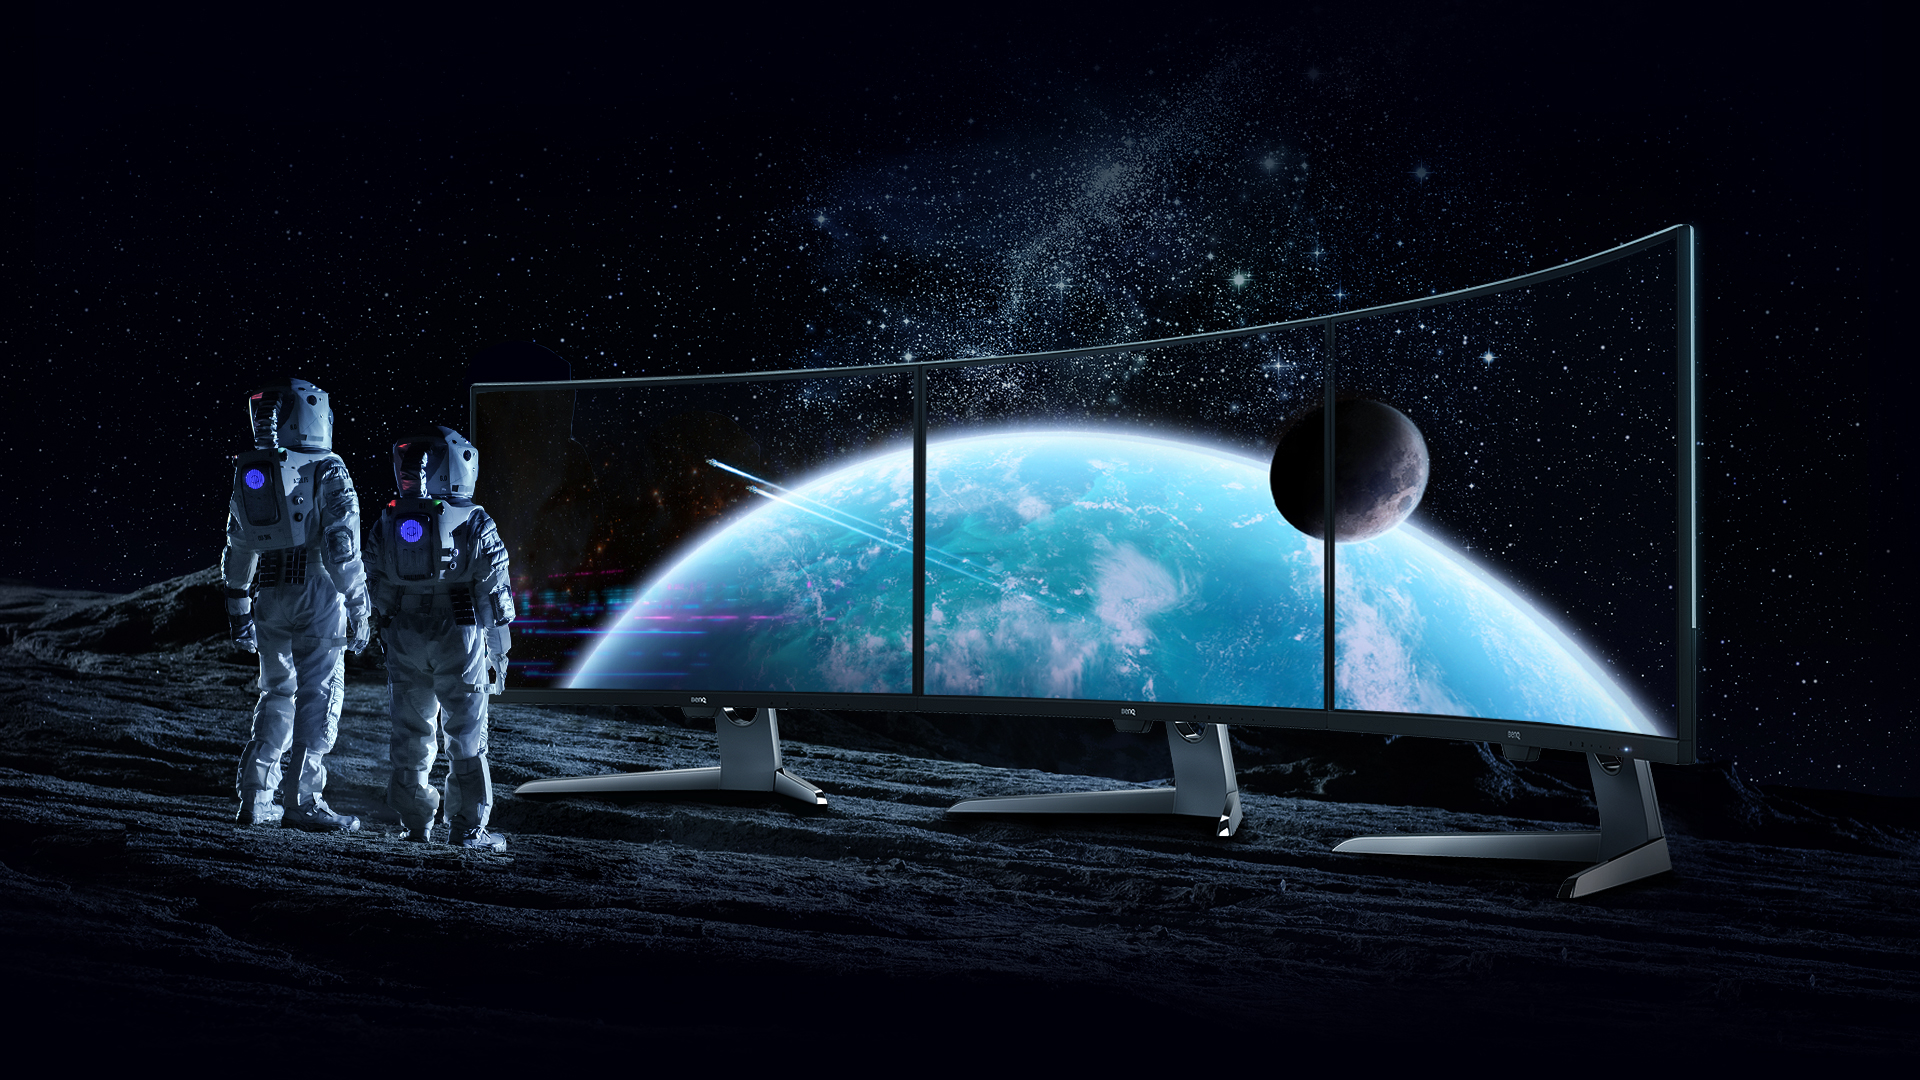 benq wallpaper,outer space,space,universe,astronomical object,illustration